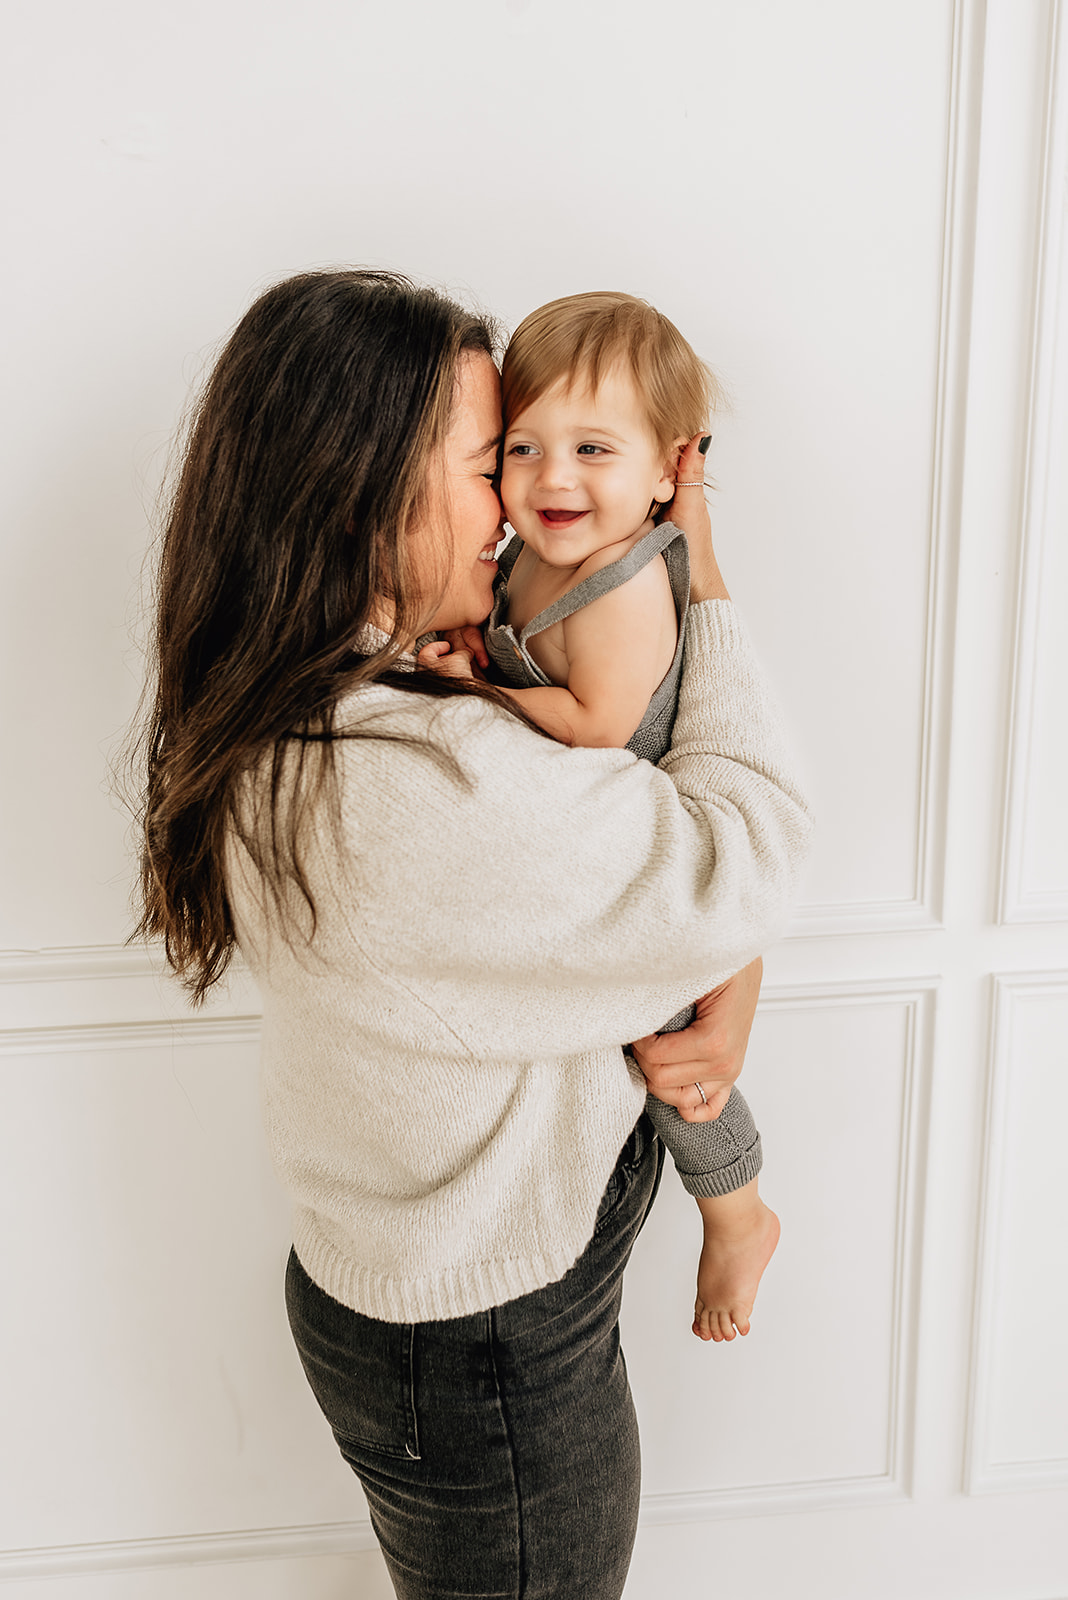 A mother snuggles her toddler son while standing in a studio in a white sweater